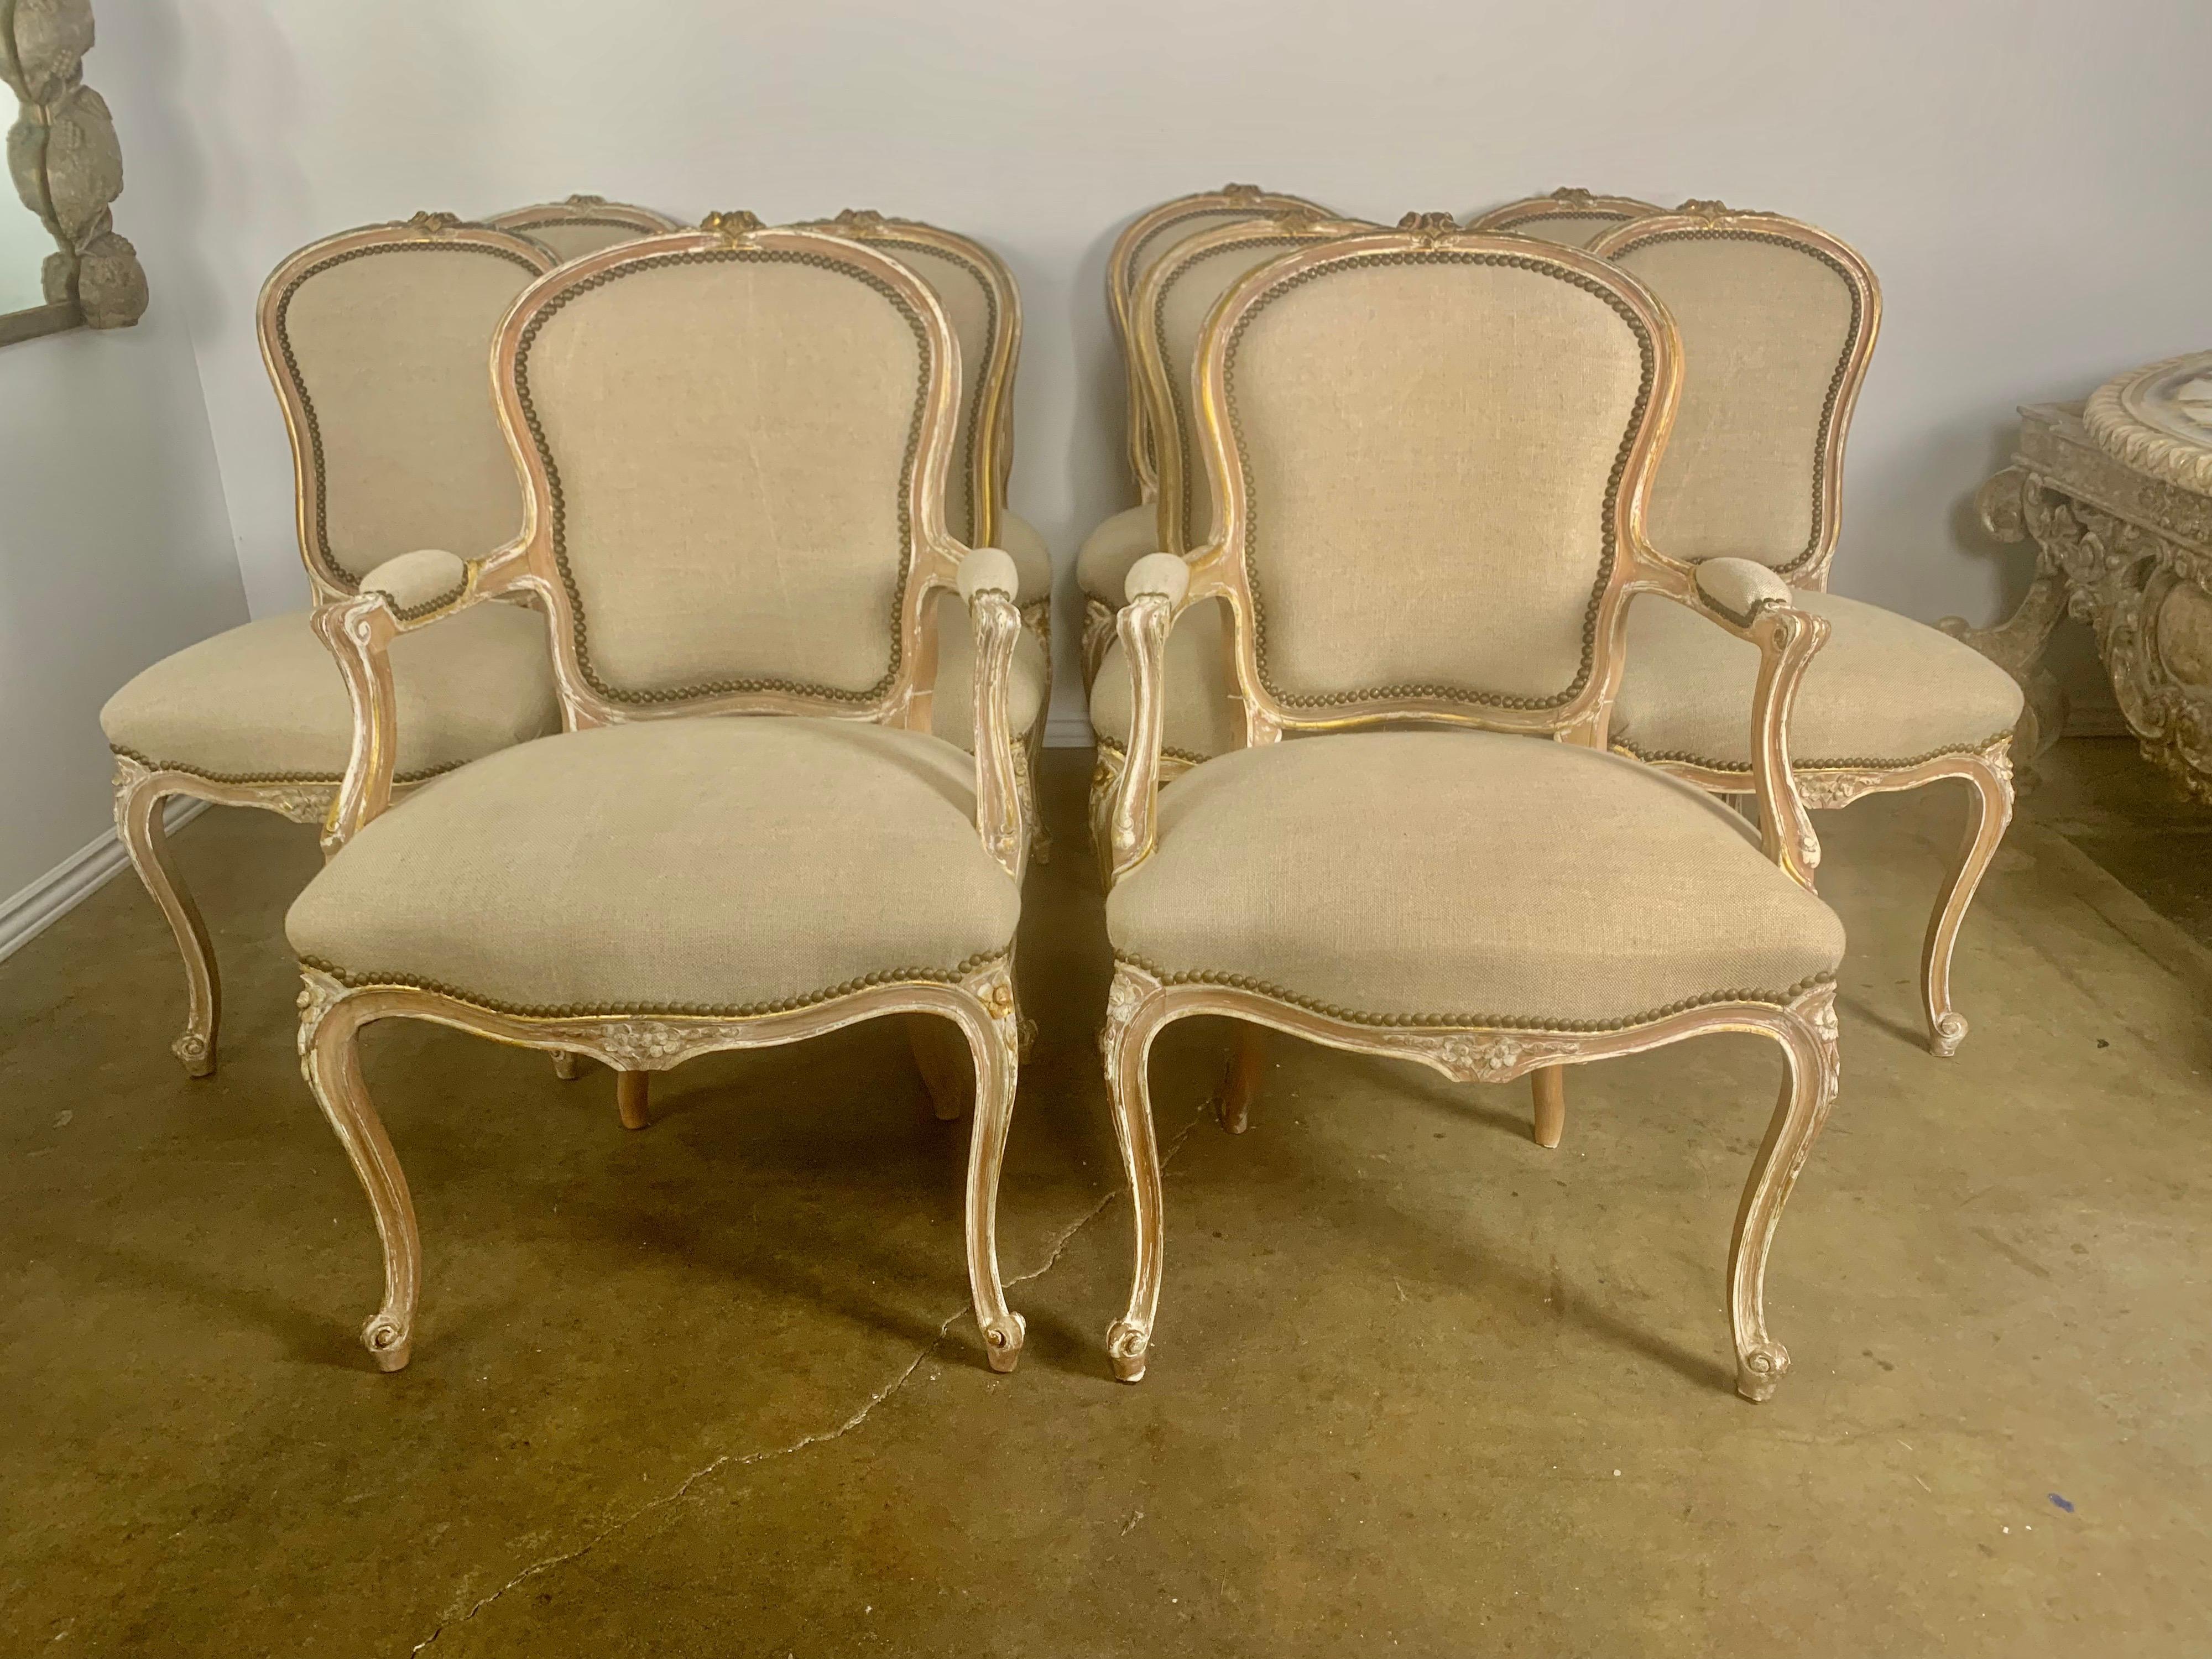 Set of ten 19th century painted Louis XV style dining chairs, two armchairs and eight side chairs, The ten chairs are beautifully hand painted and stand on four cabriole legs. The chairs are newly upholstered in a washed Belgium linen and detailed